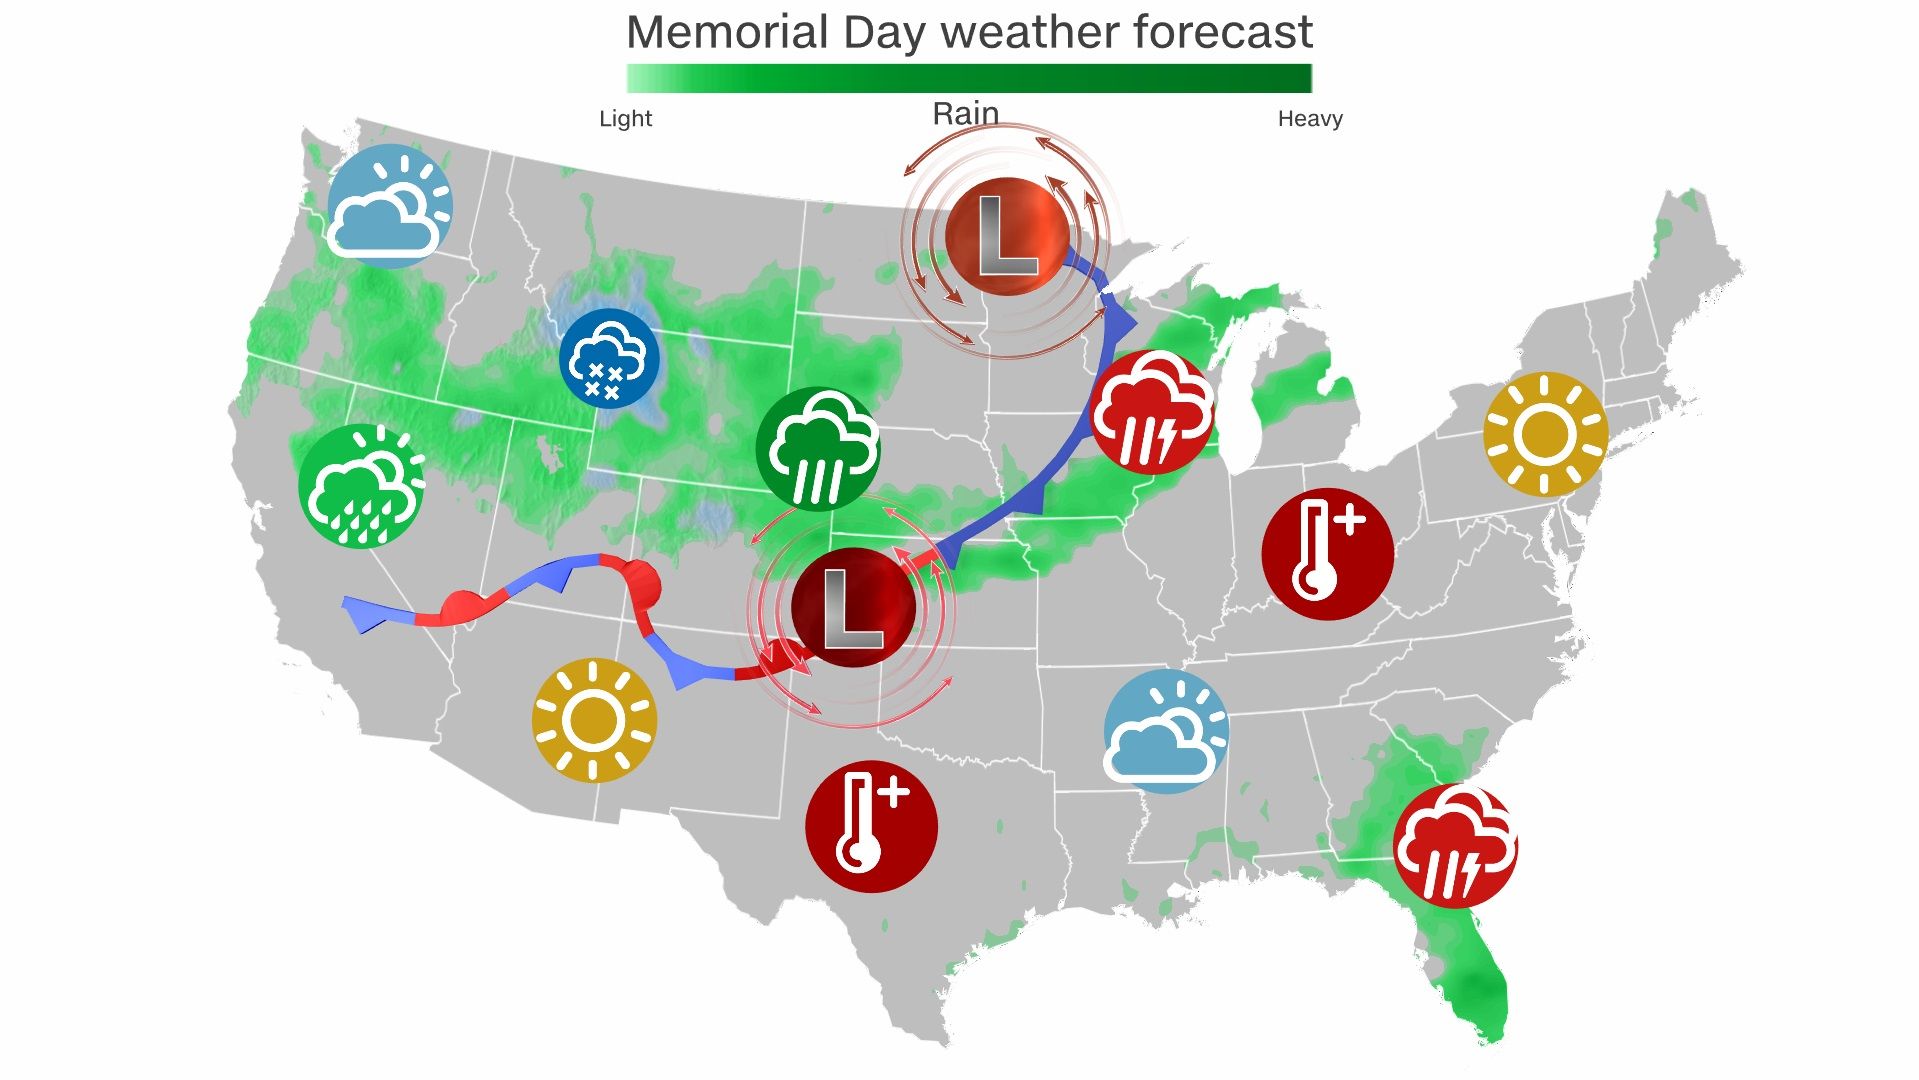 Memorial Day weekend calls for triple digit temperatures and storms for